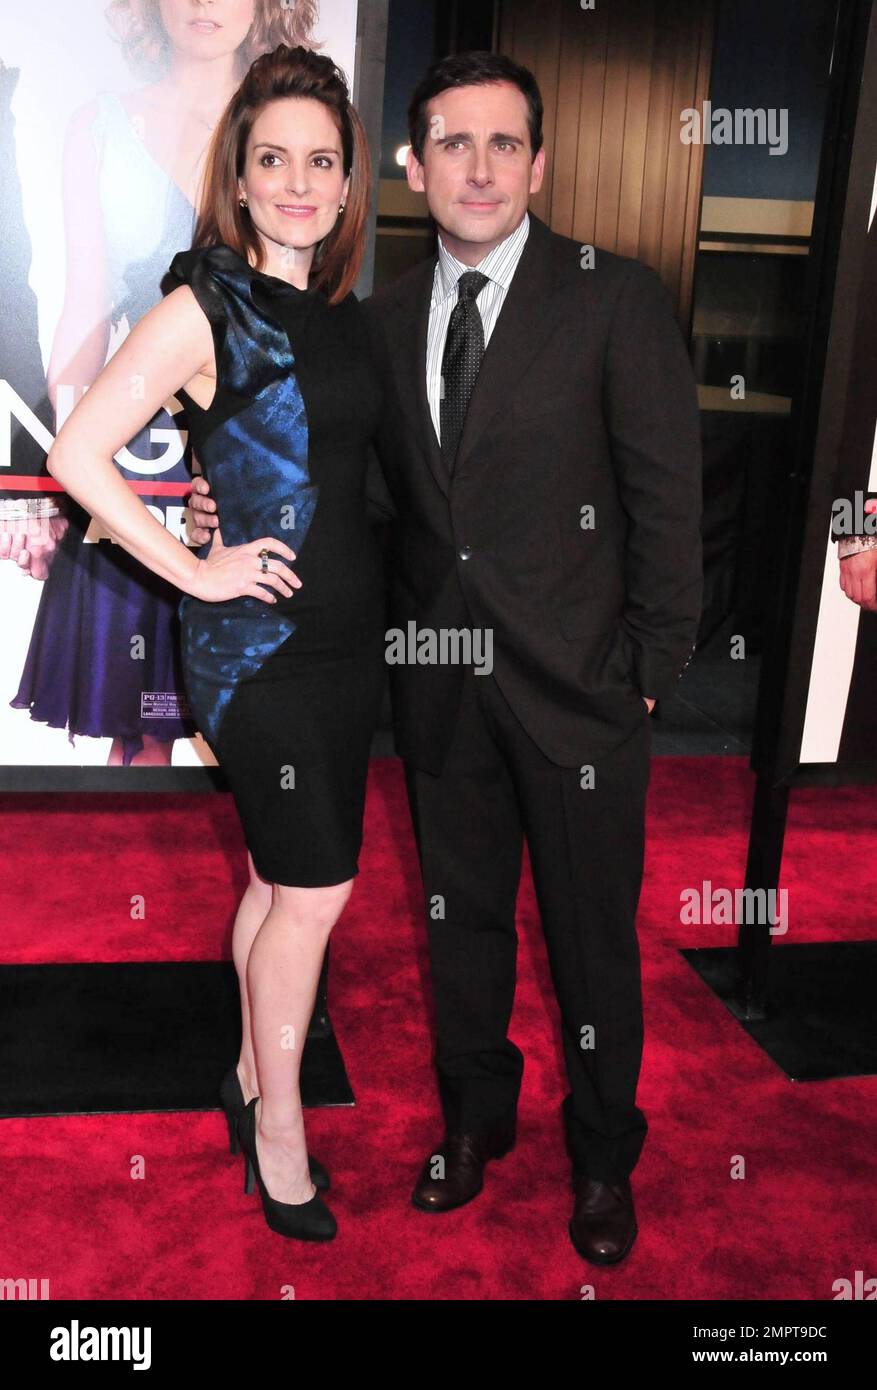 https://c8.alamy.com/comp/2MPT9DC/tina-fey-and-steve-carell-at-the-premiere-of-date-night-at-the-ziegfeld-theatre-in-new-york-ny-4610-2MPT9DC.jpg